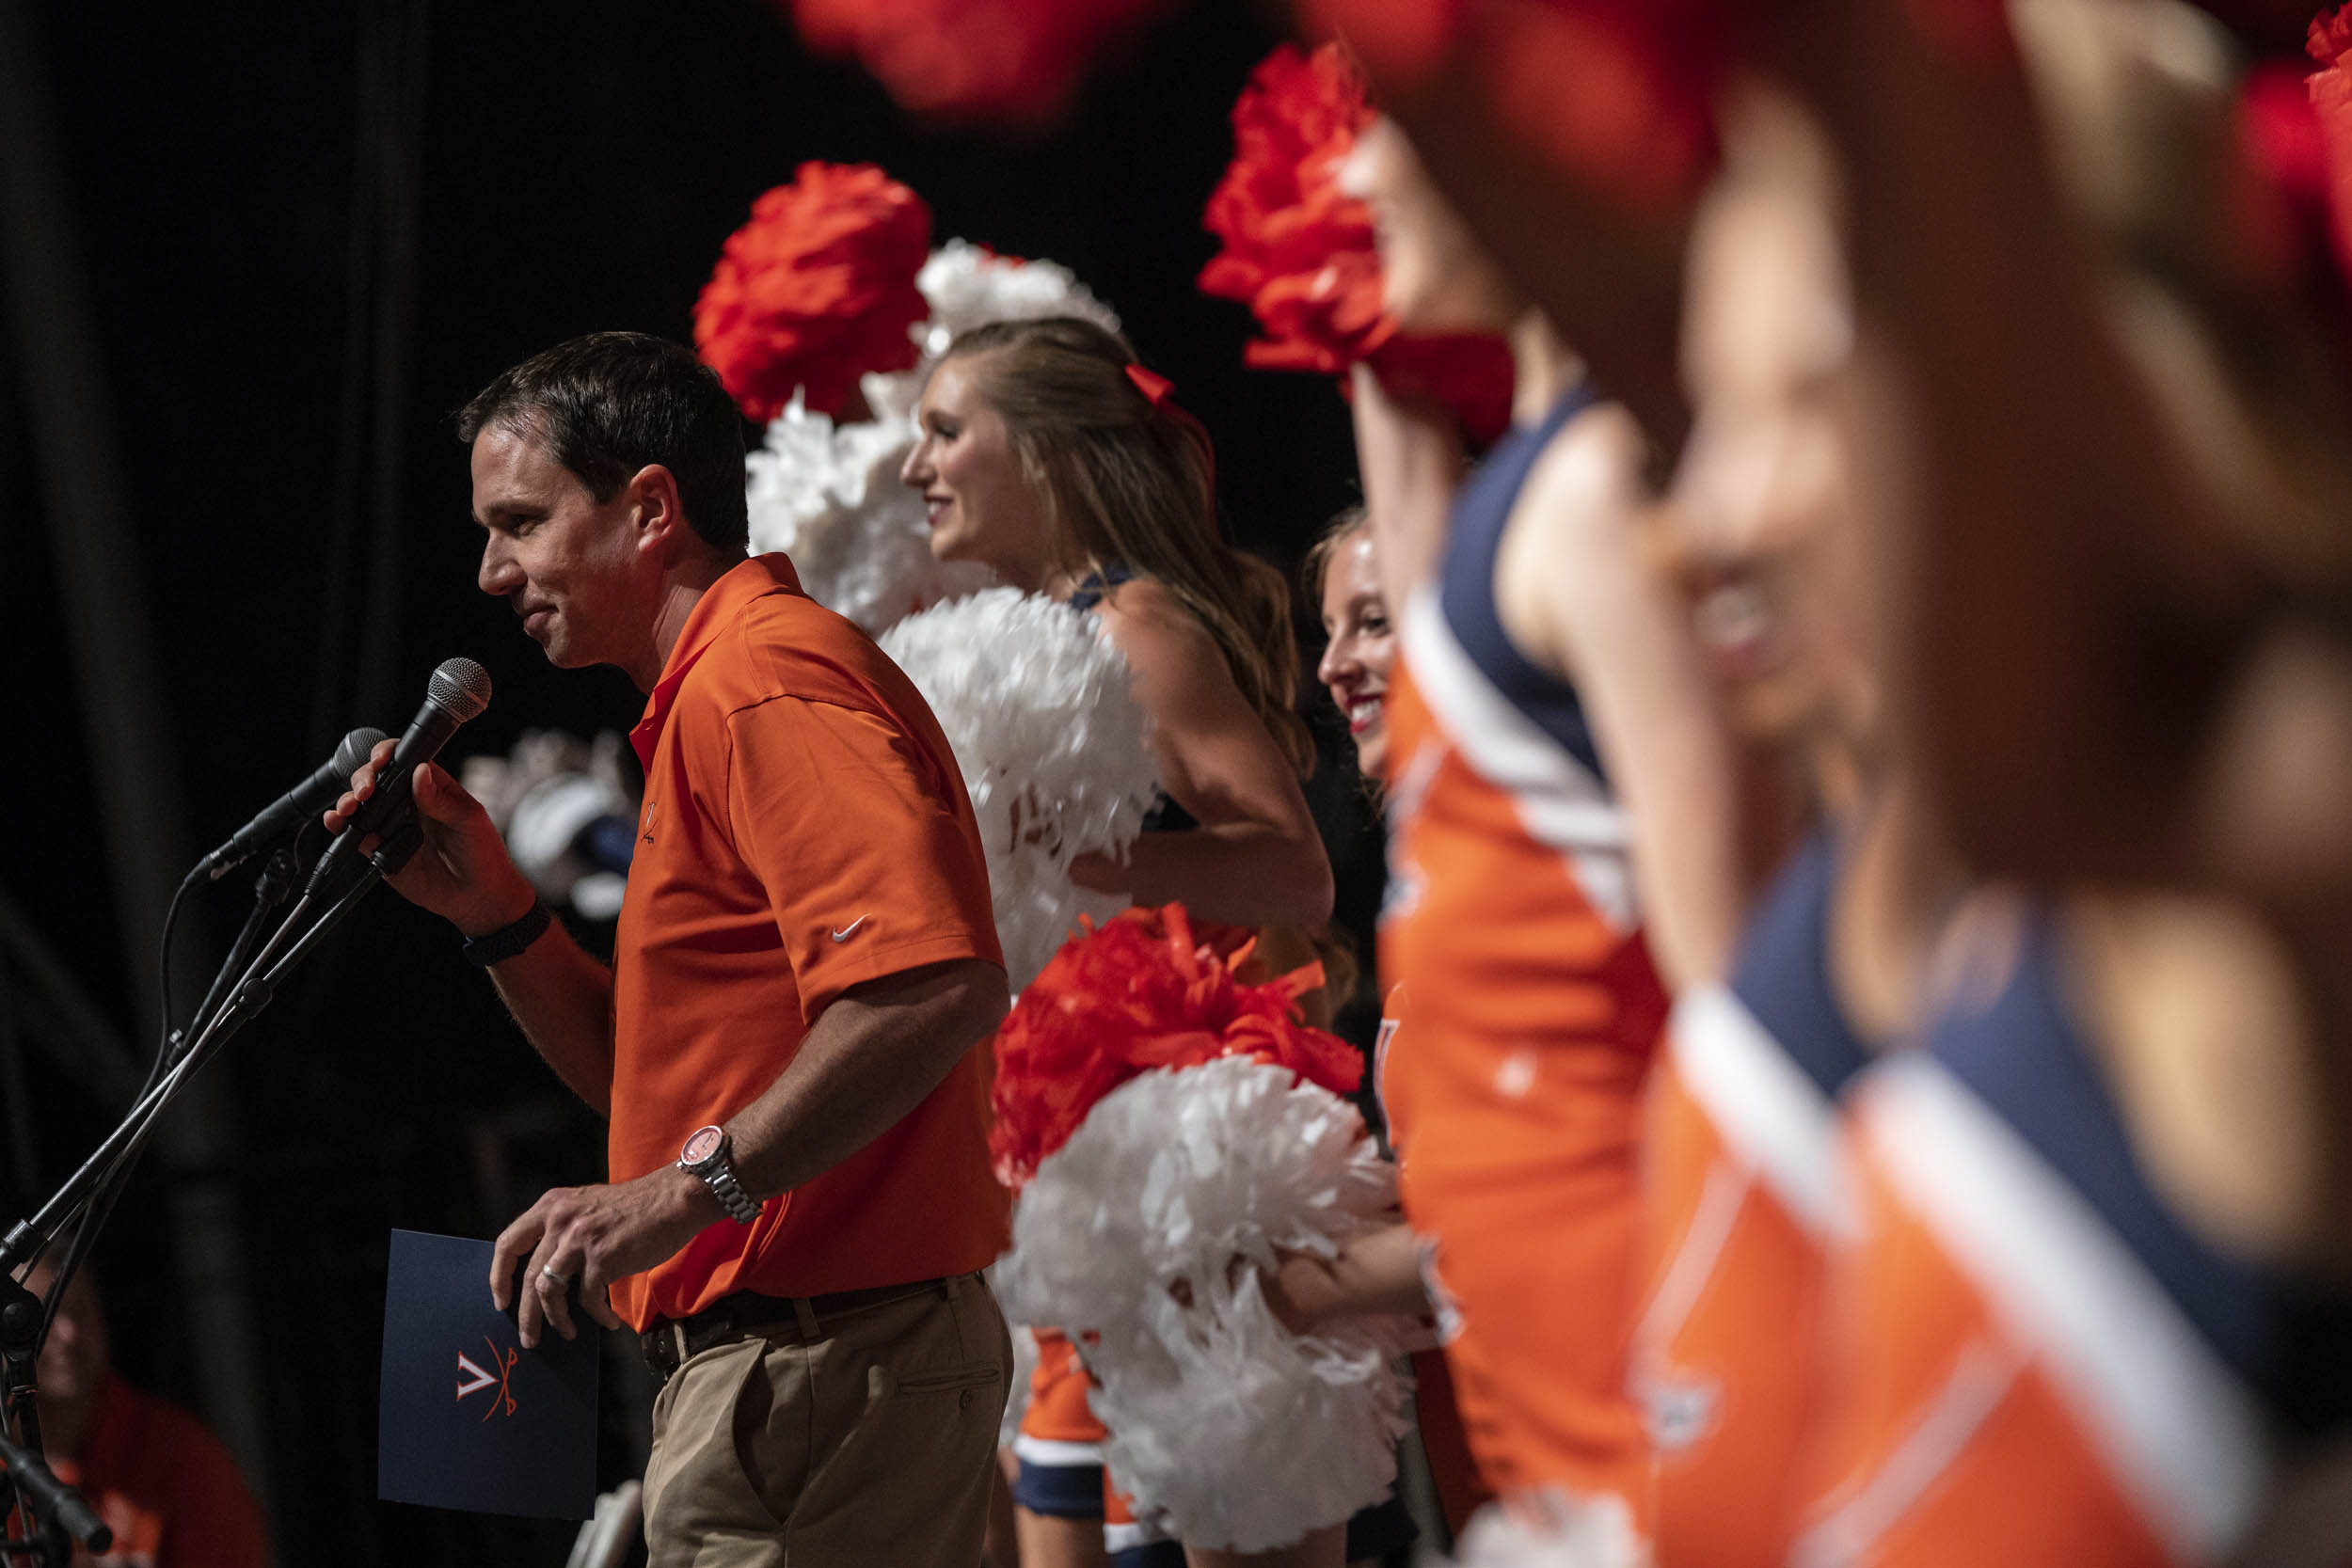 Cheerleaders on stage with a man talking into a microphone